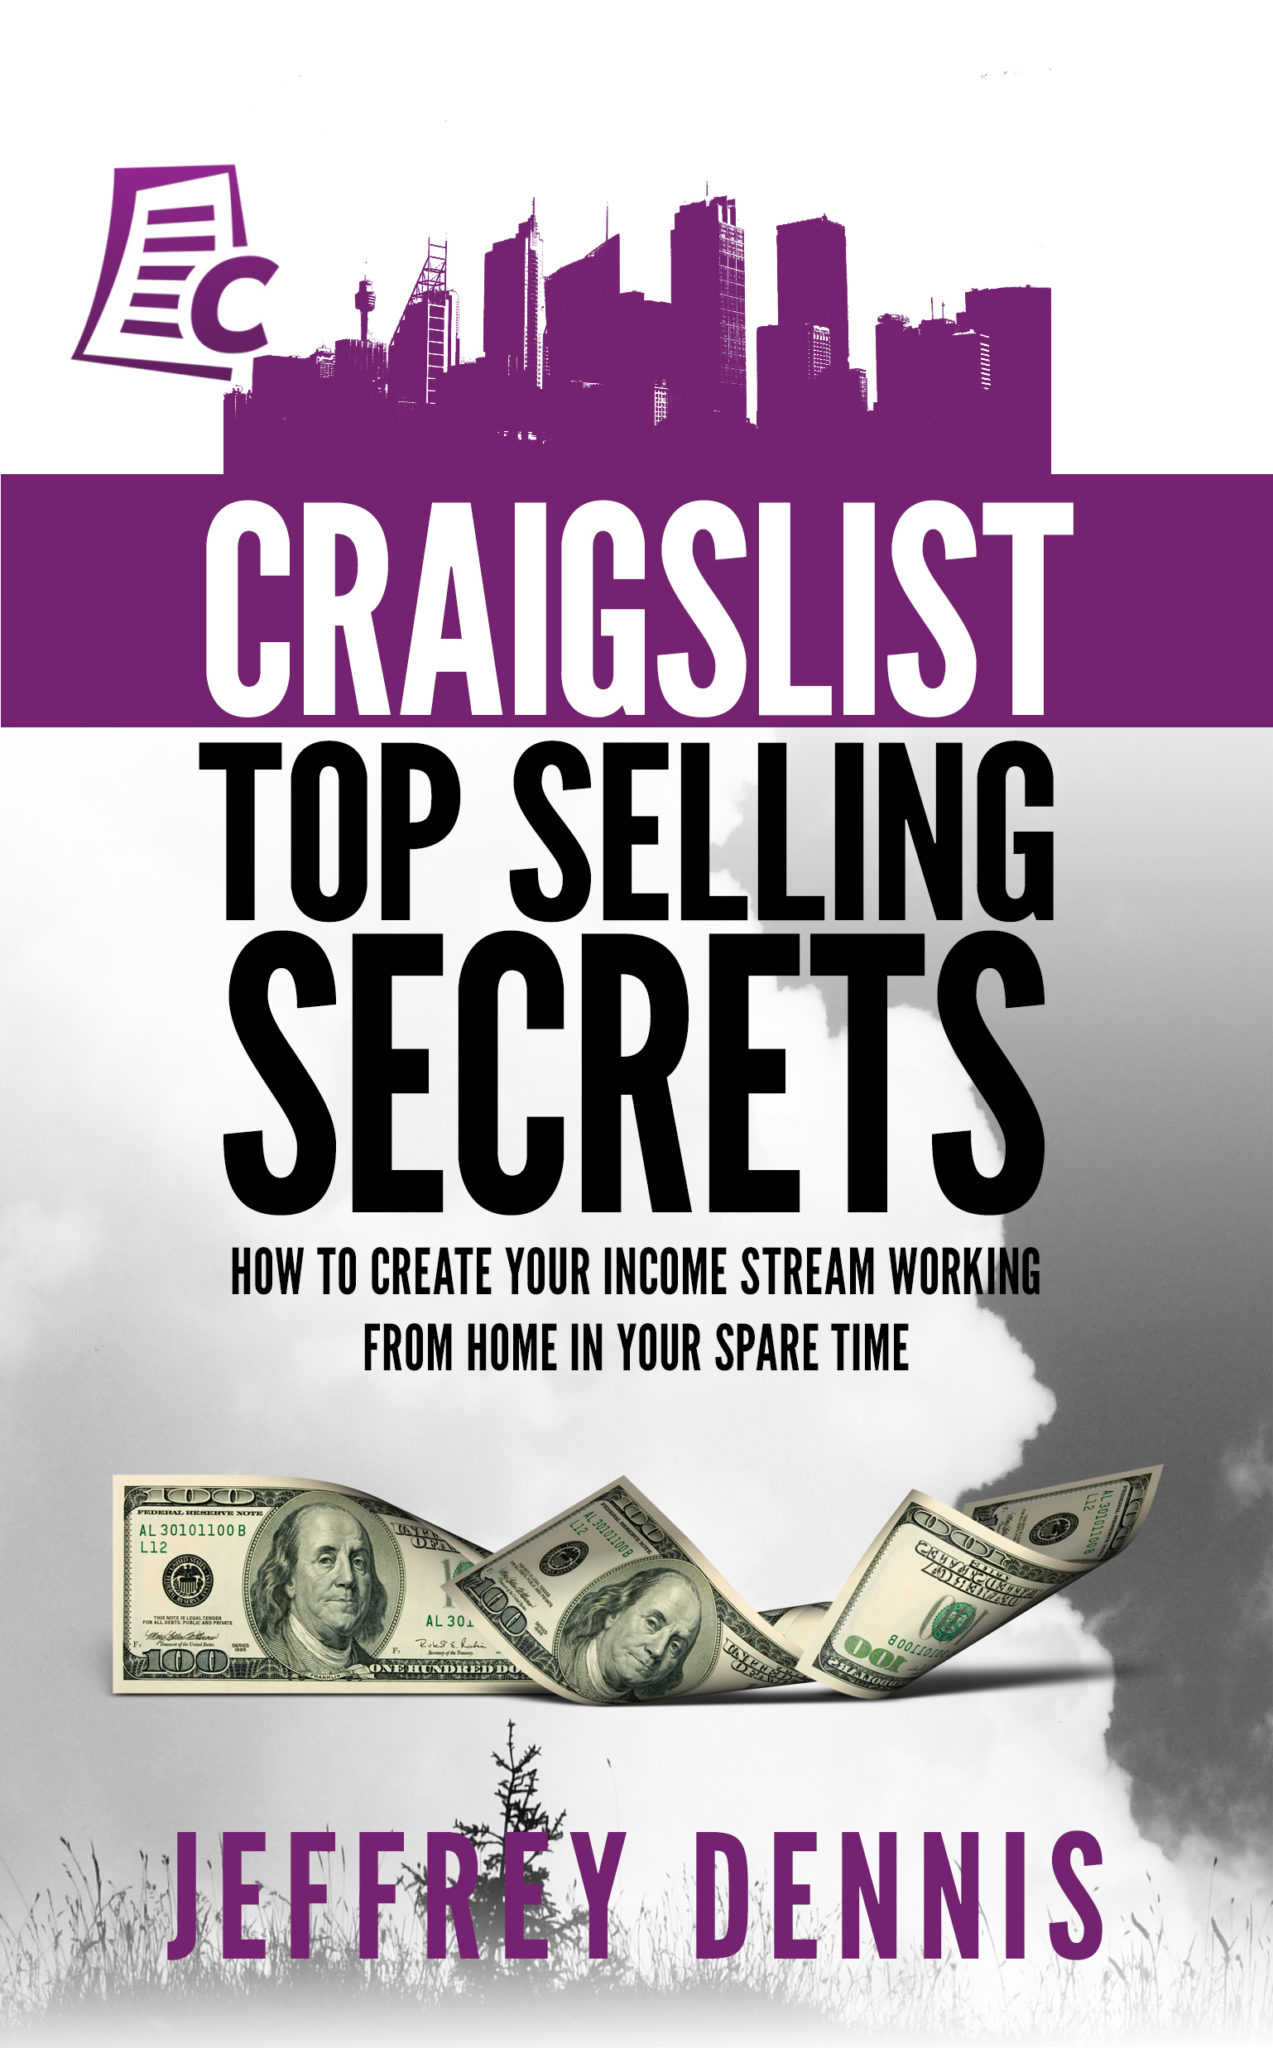 FREE: Craigslist Top Selling Secrets: How to create your income stream working from home in your spare time by Jeffrey Dennis